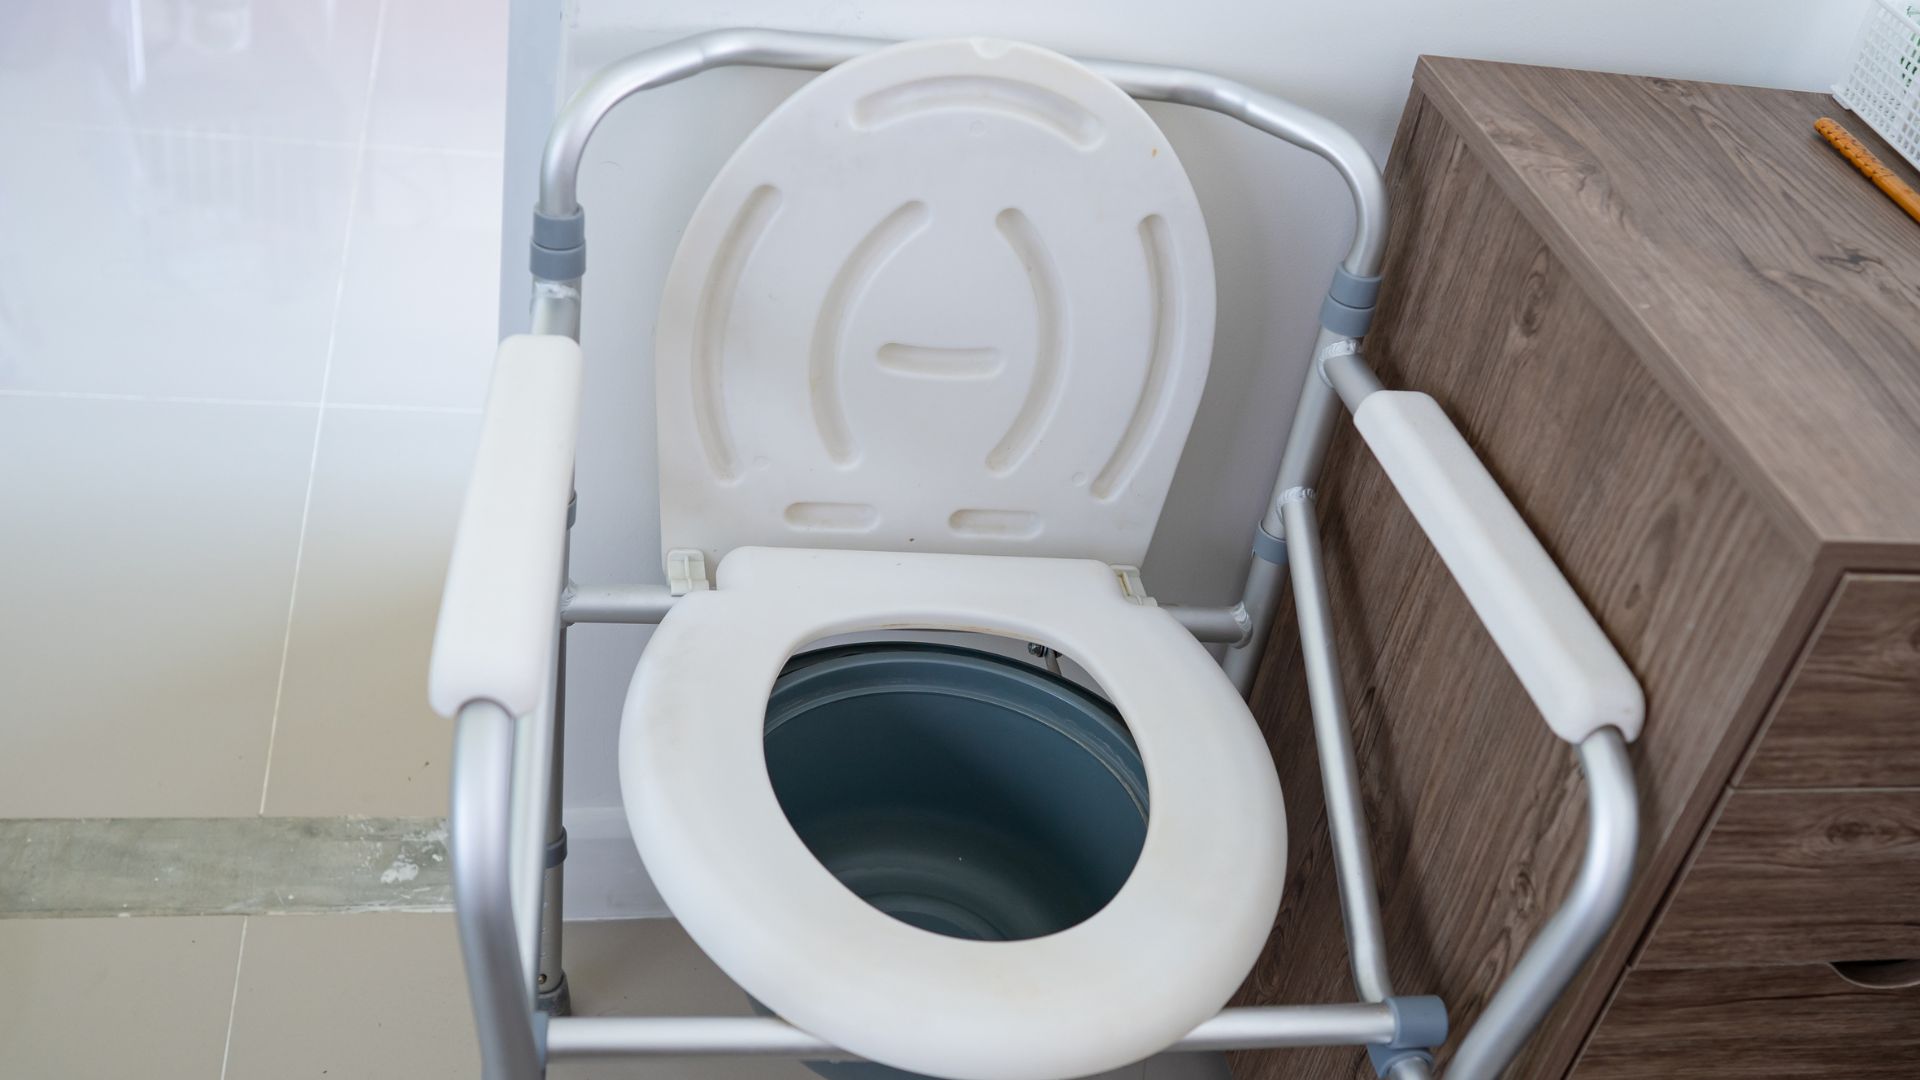 Outdated Toilet Features Relevant to Plumbers